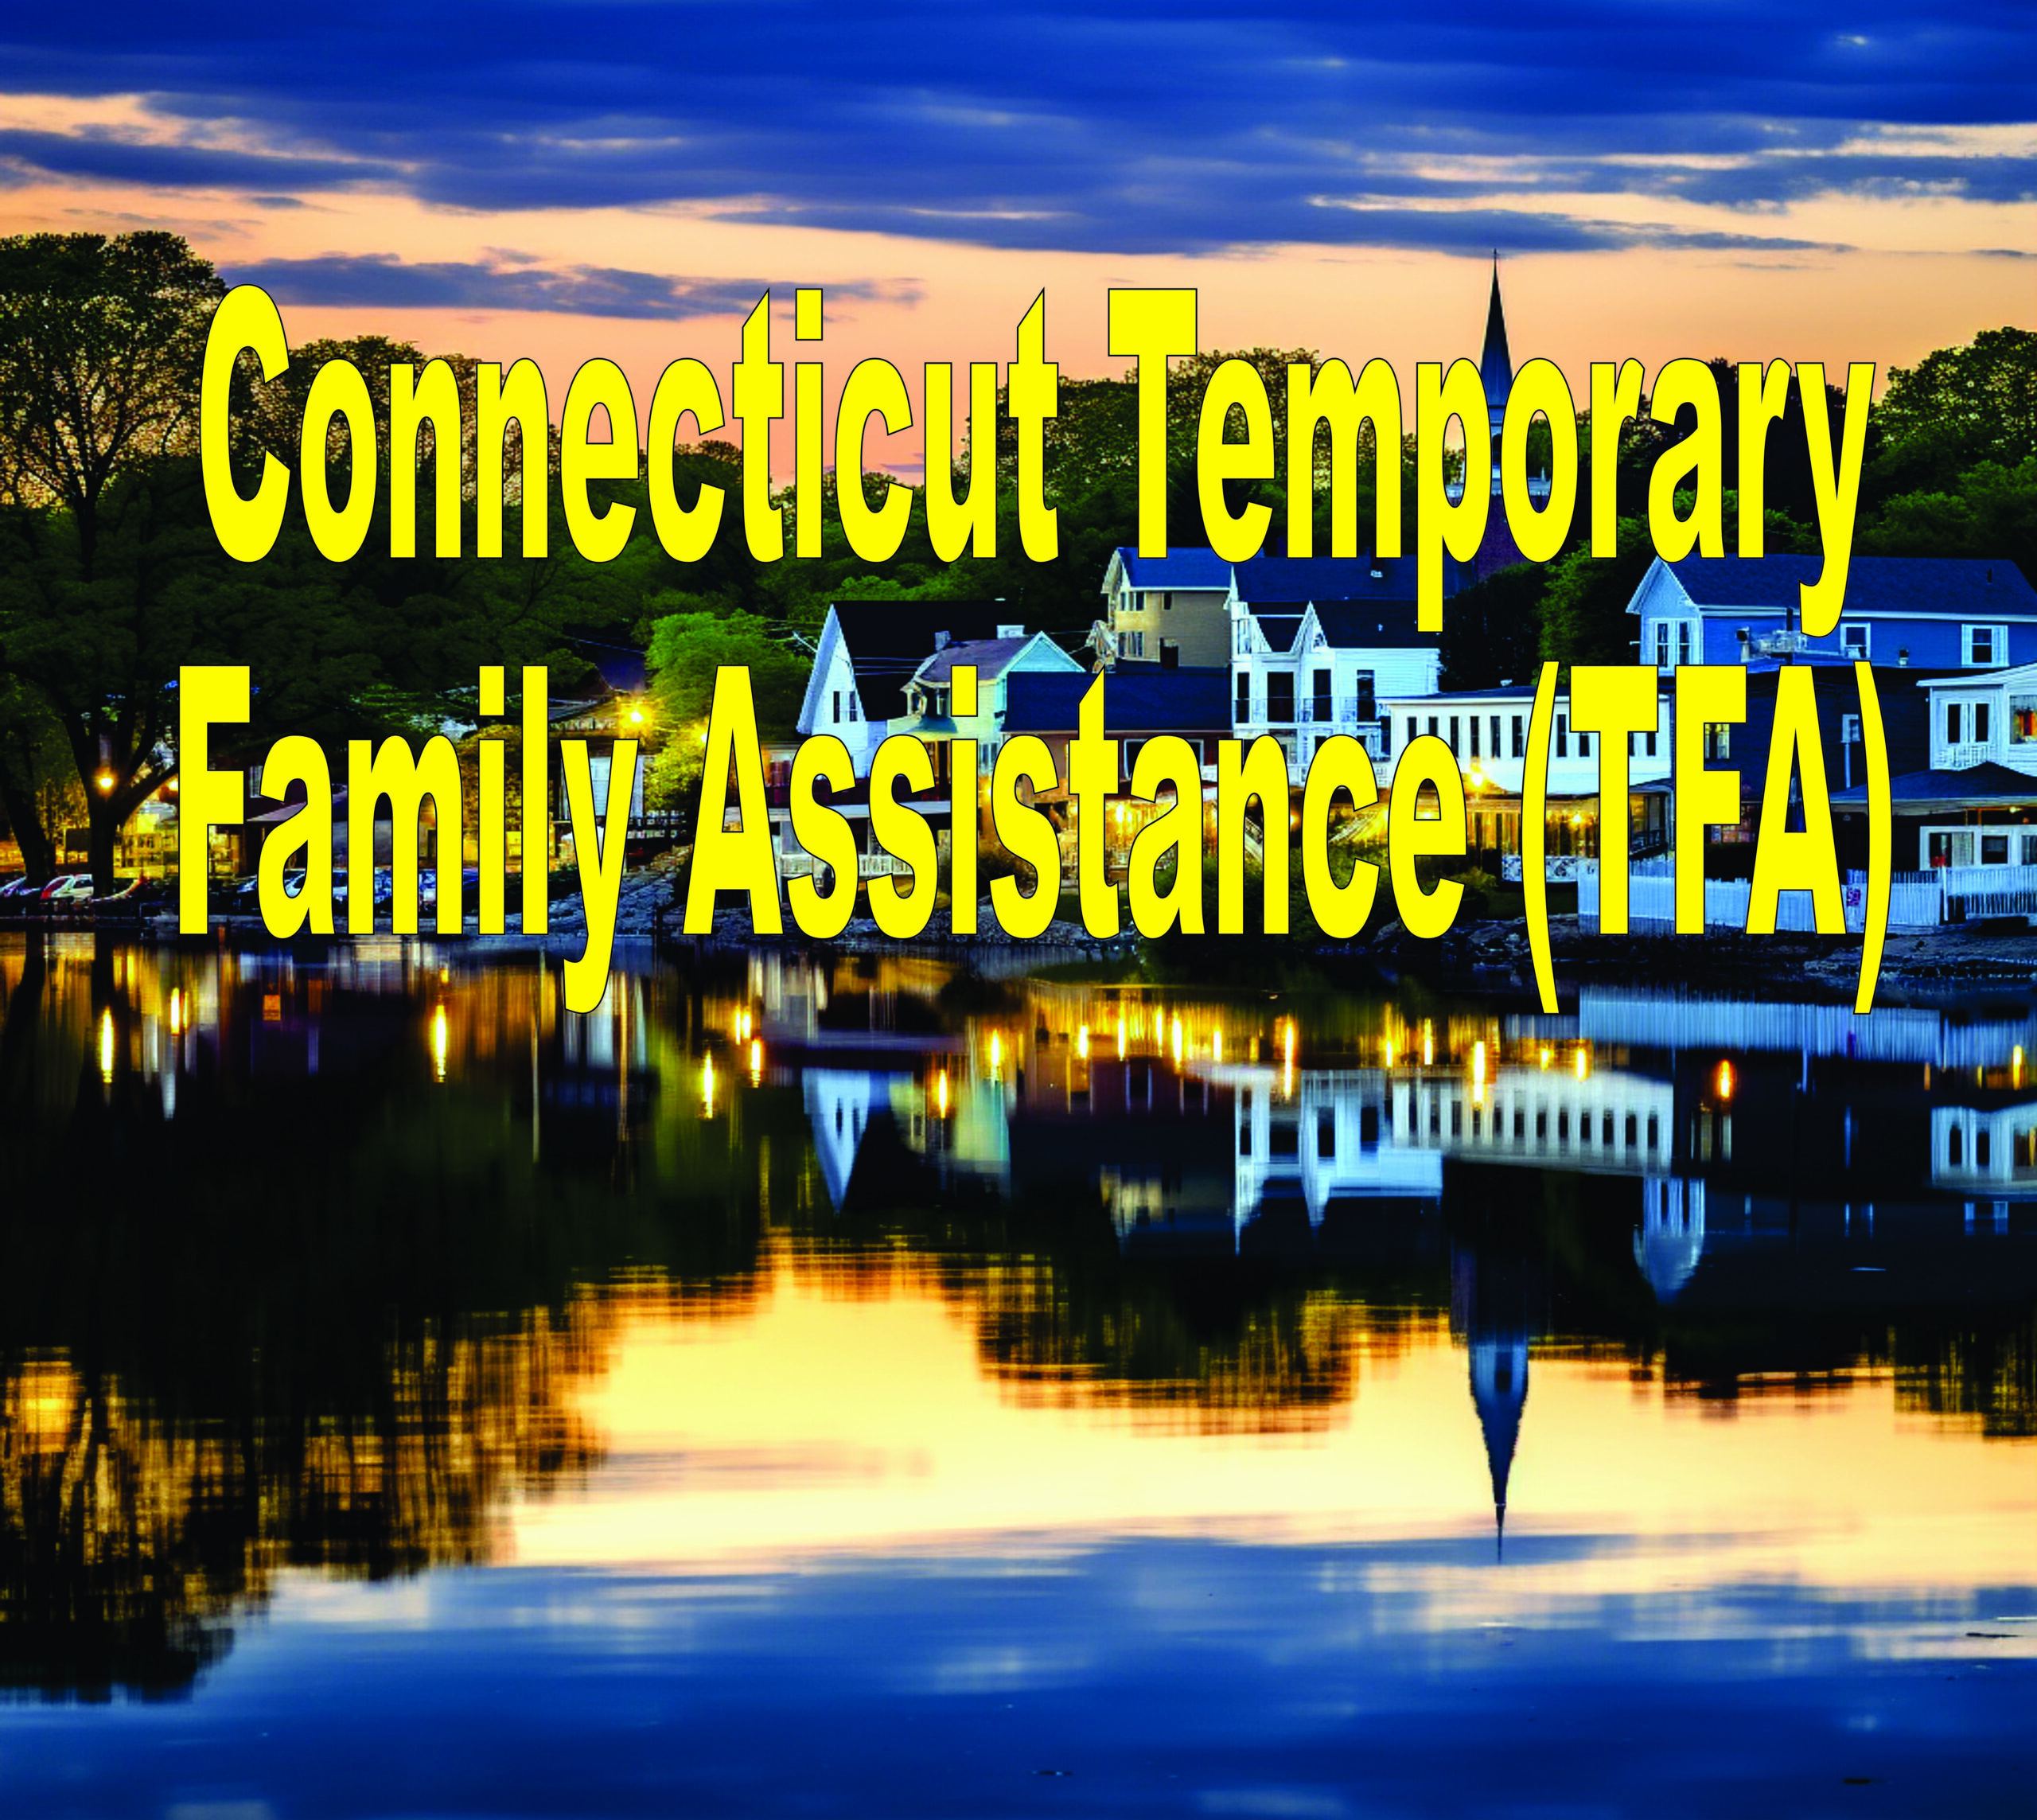 Connecticut Temporary Family Assistance (tfa)